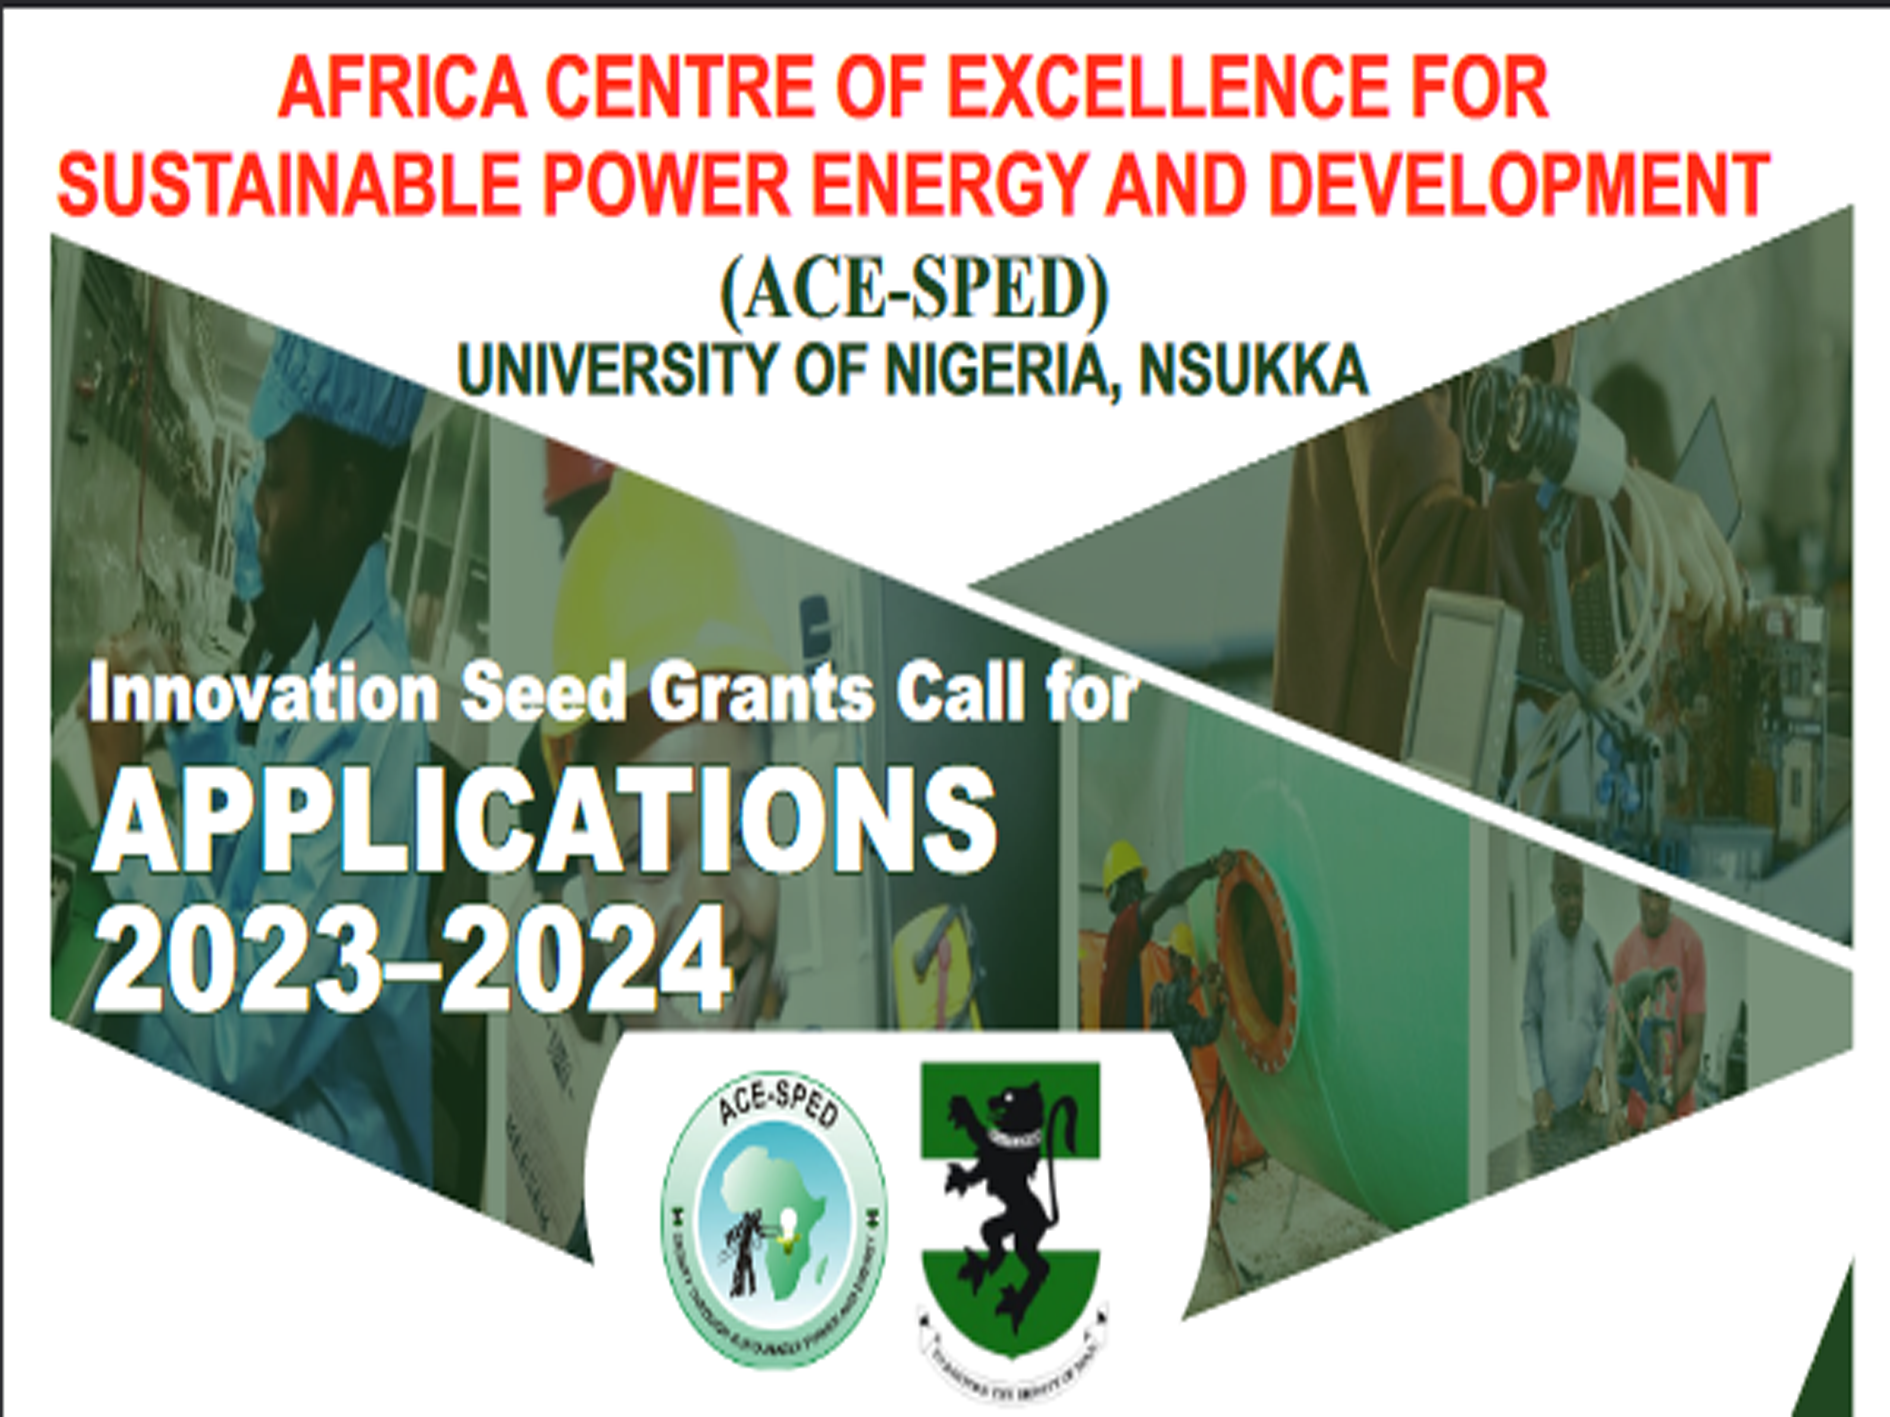 20 Million Naira Innovation Seed Grant: Call for APPLICATIONS 2023–2024